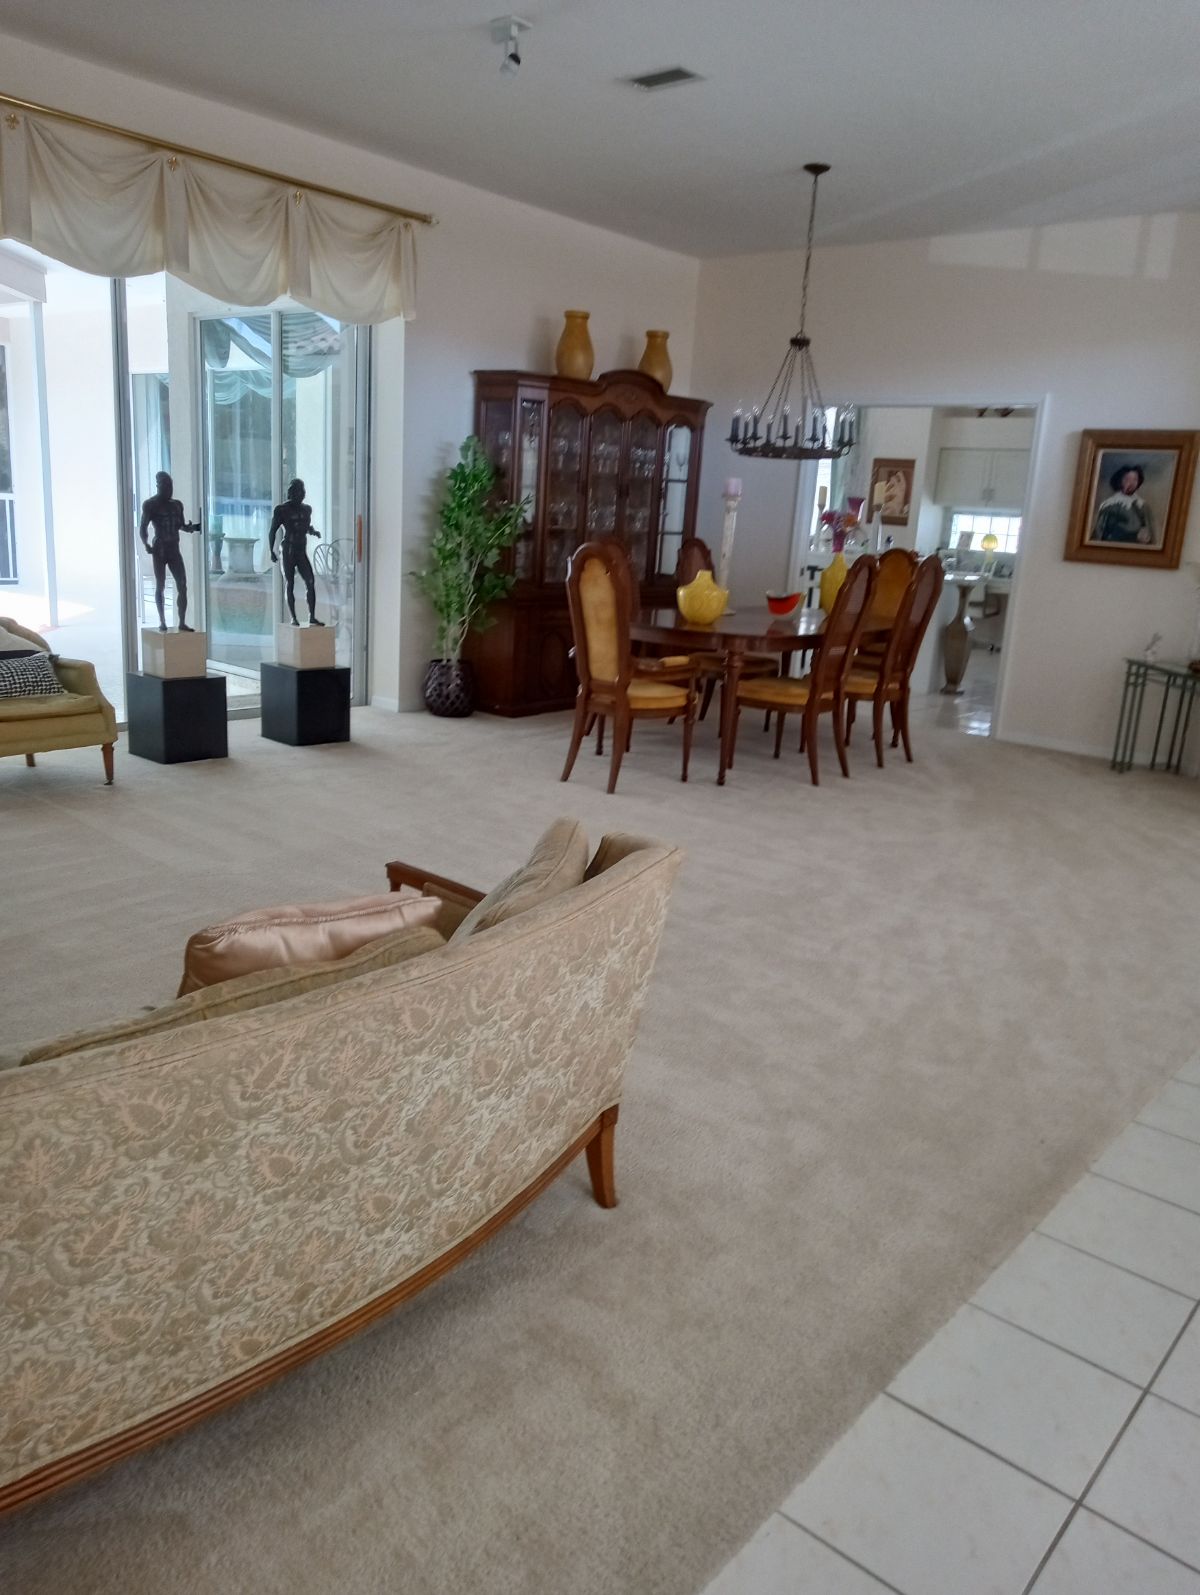 Professional cleaner from Tarpon Springs cleaning company providing thorough cleaning services in a local home